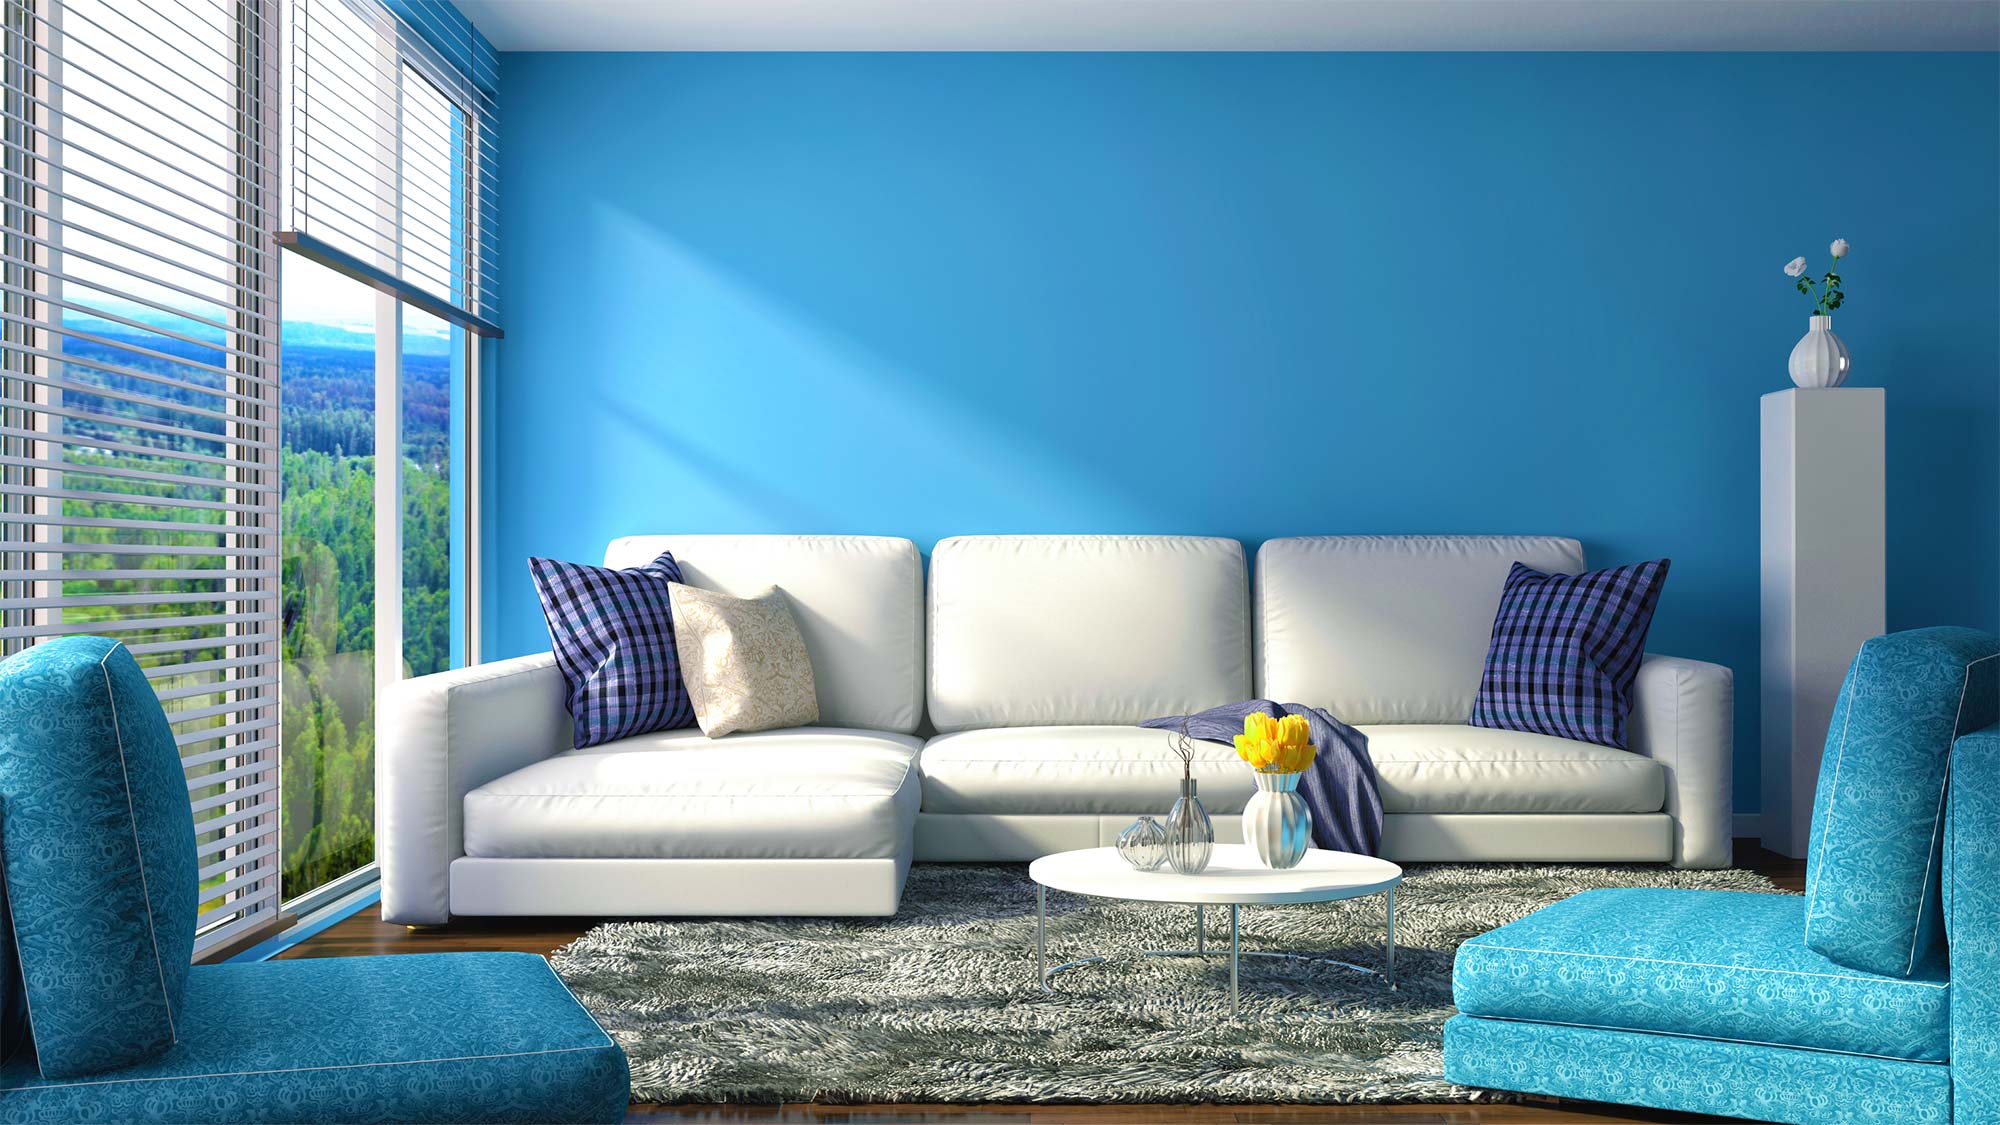 What Colors Make A Small Living Room Look Bigger? 7 Space-Stretching Tricks